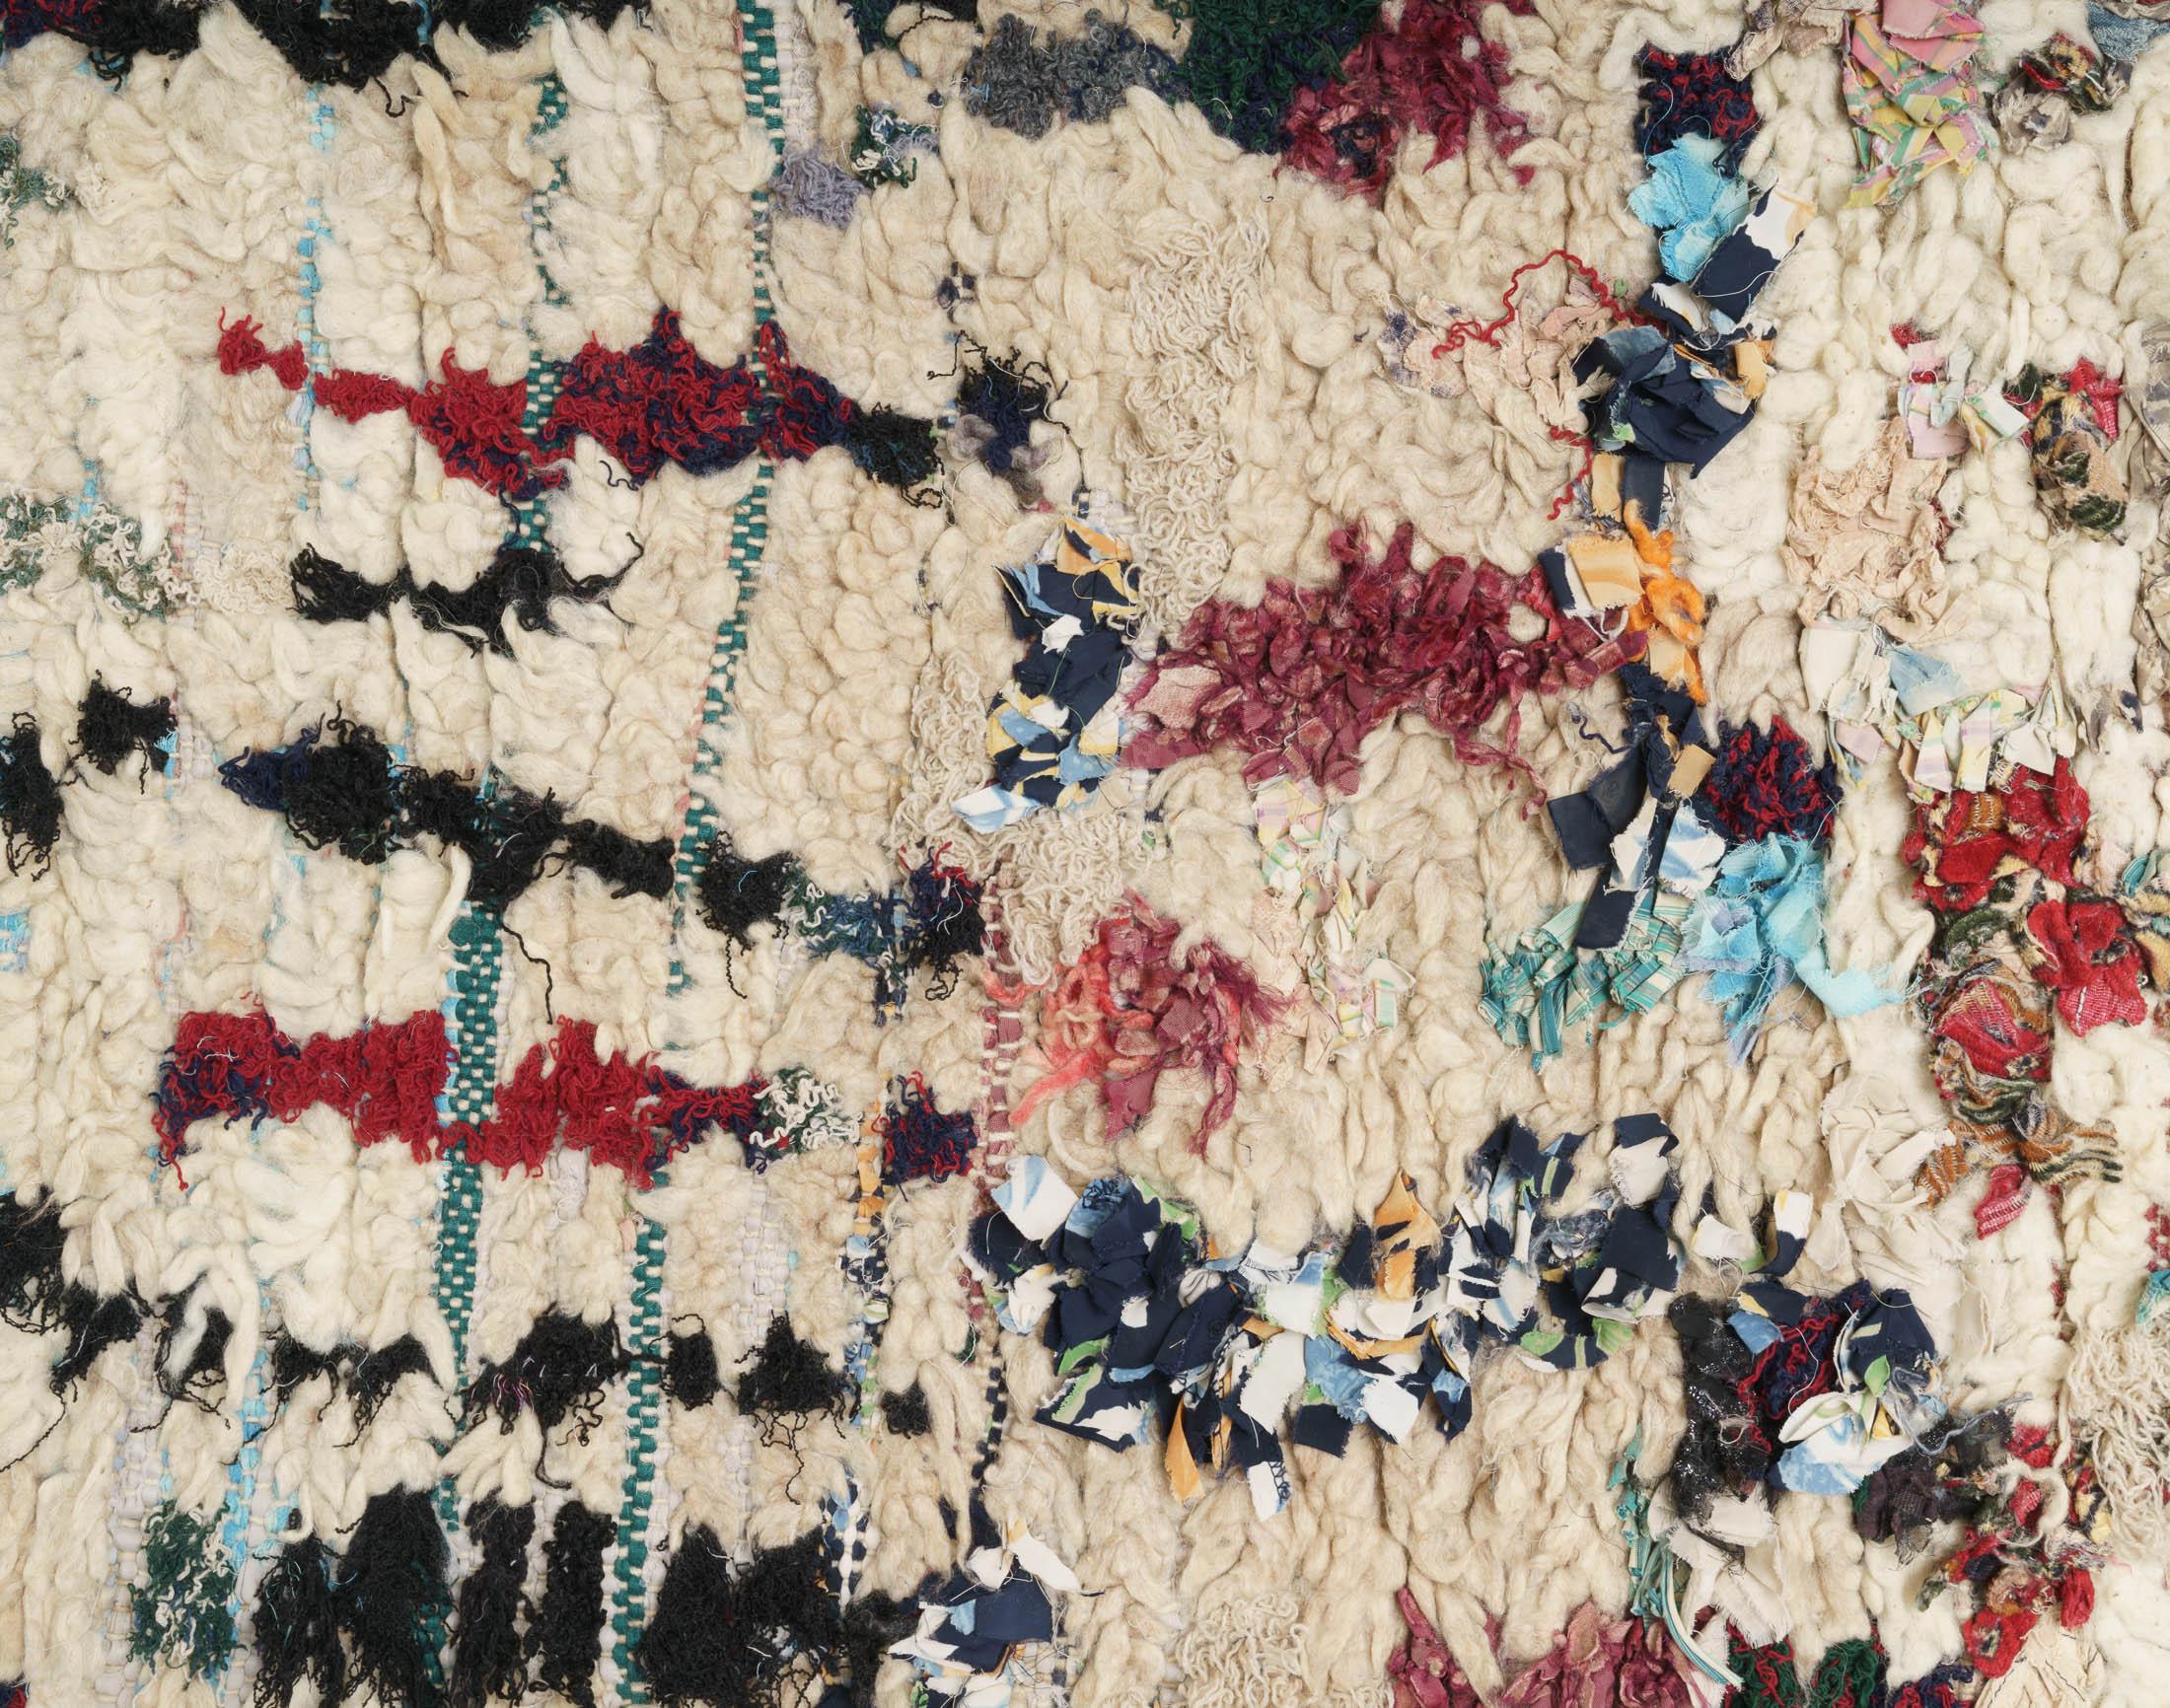 Colorful Moroccan Berber rug from the Boujaad tribe that originates from middle Morocco. Red, black, blue brown and green tones on natural white background. Medium-thick pile.

This is an authentic Berber carpet from Morocco. In Berber tribes rugs